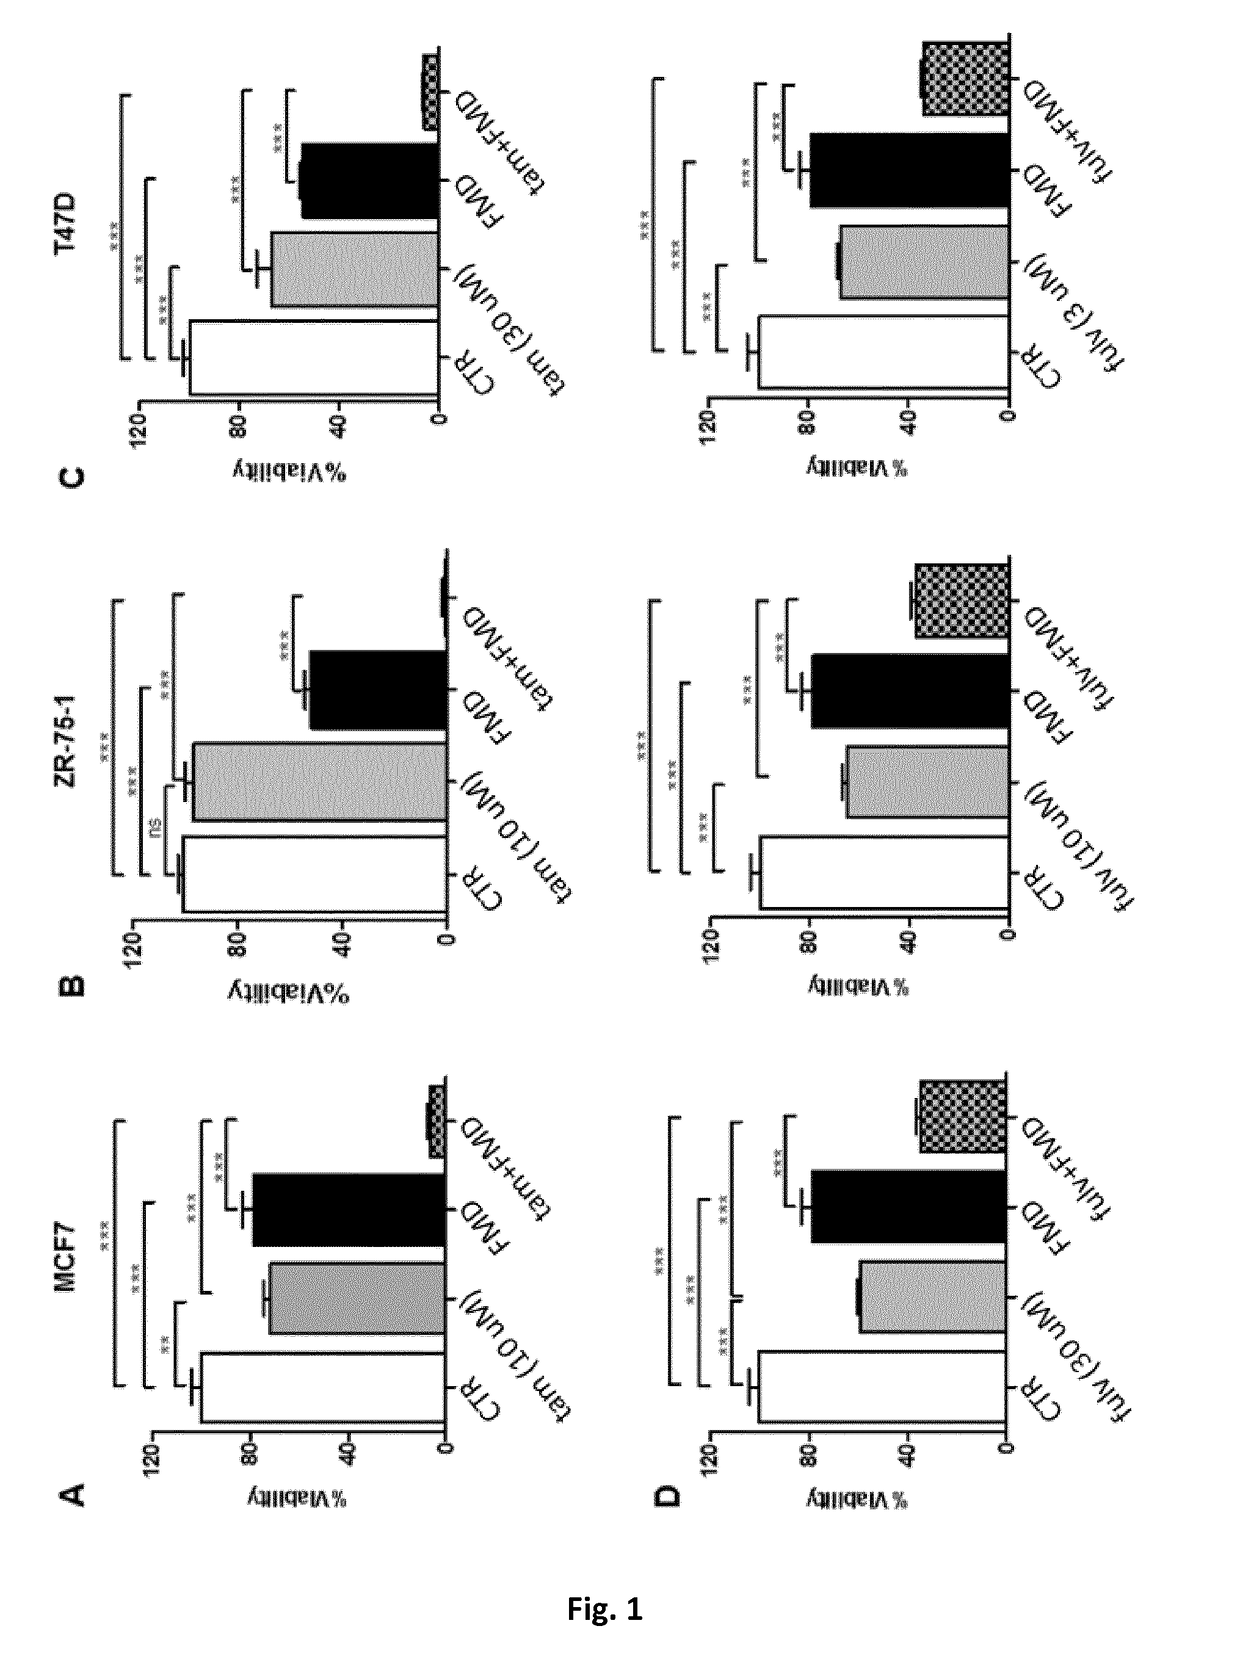 Use of a fasting mimicking diet to enhance the efficacy of antiestrogens in cancer